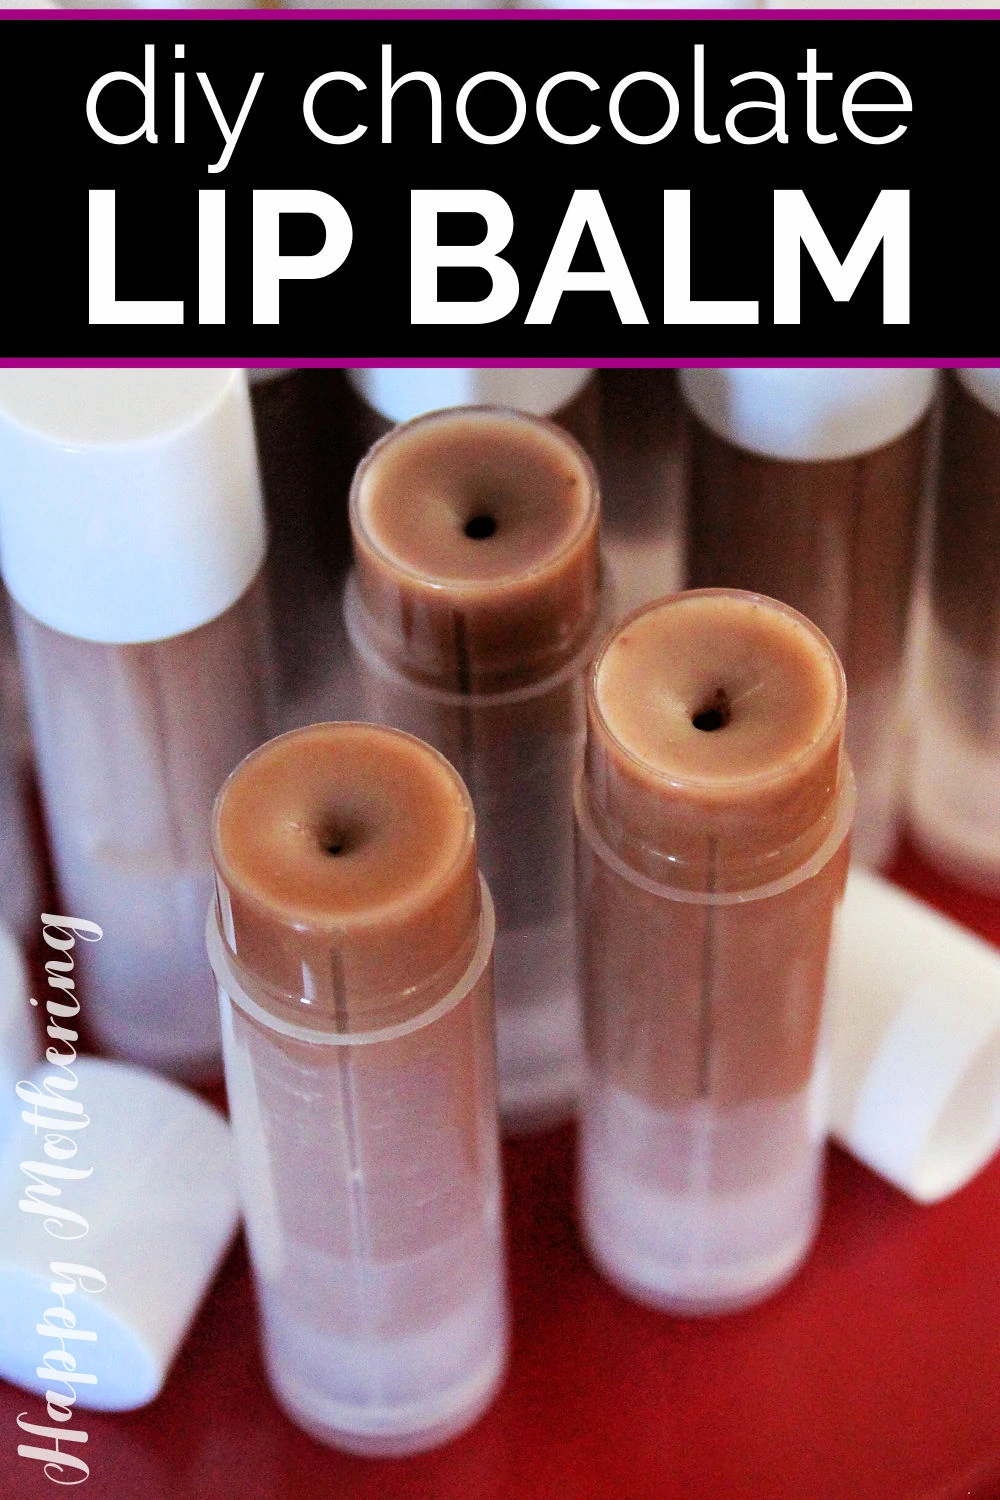 Several tubes of DIY Chocolate Lip Balm on a red tray.